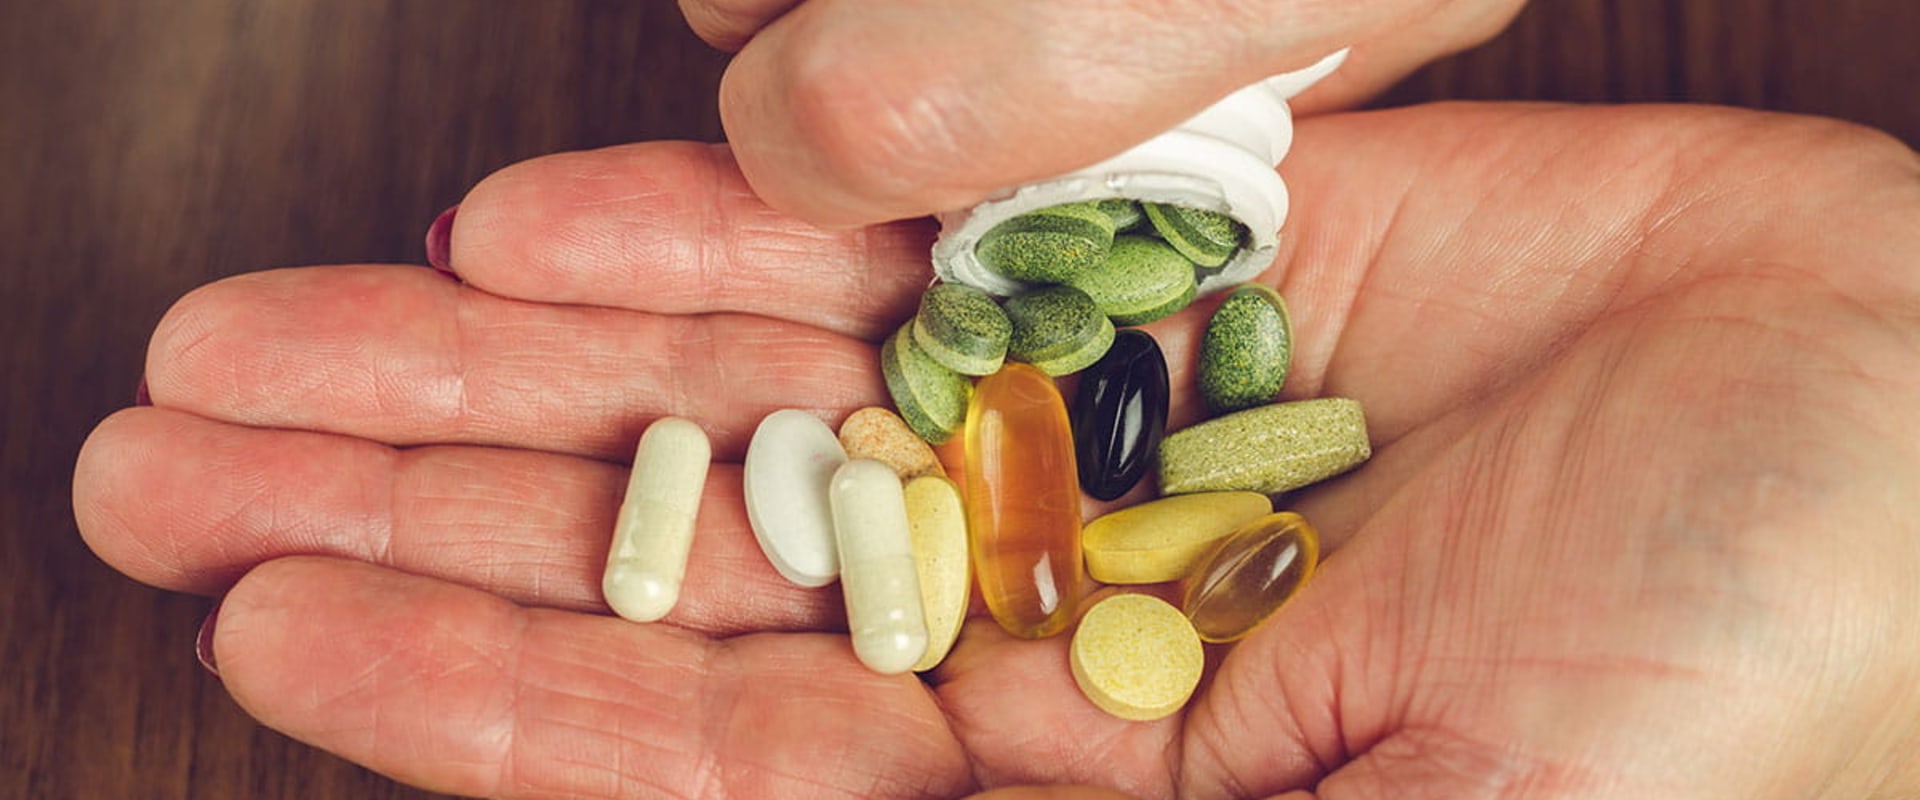 What time of day should i take multiple vitamins?